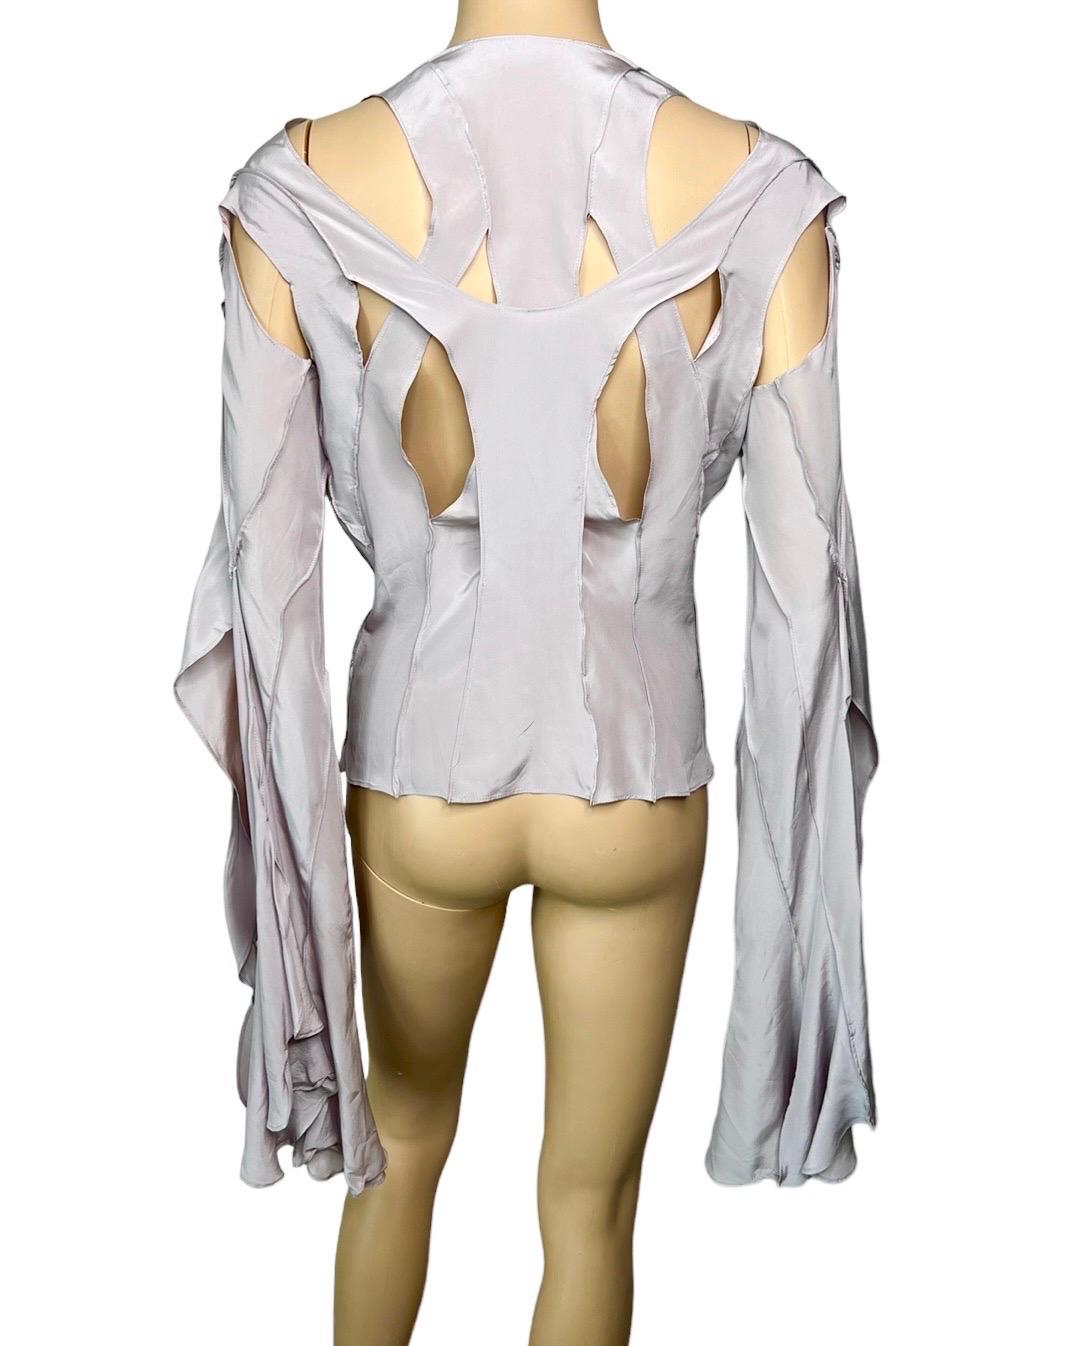 Tom Ford for Yves Saint Laurent YSL S/S 2003 Runway Cutout Shirt Blouse Top In Good Condition For Sale In Naples, FL